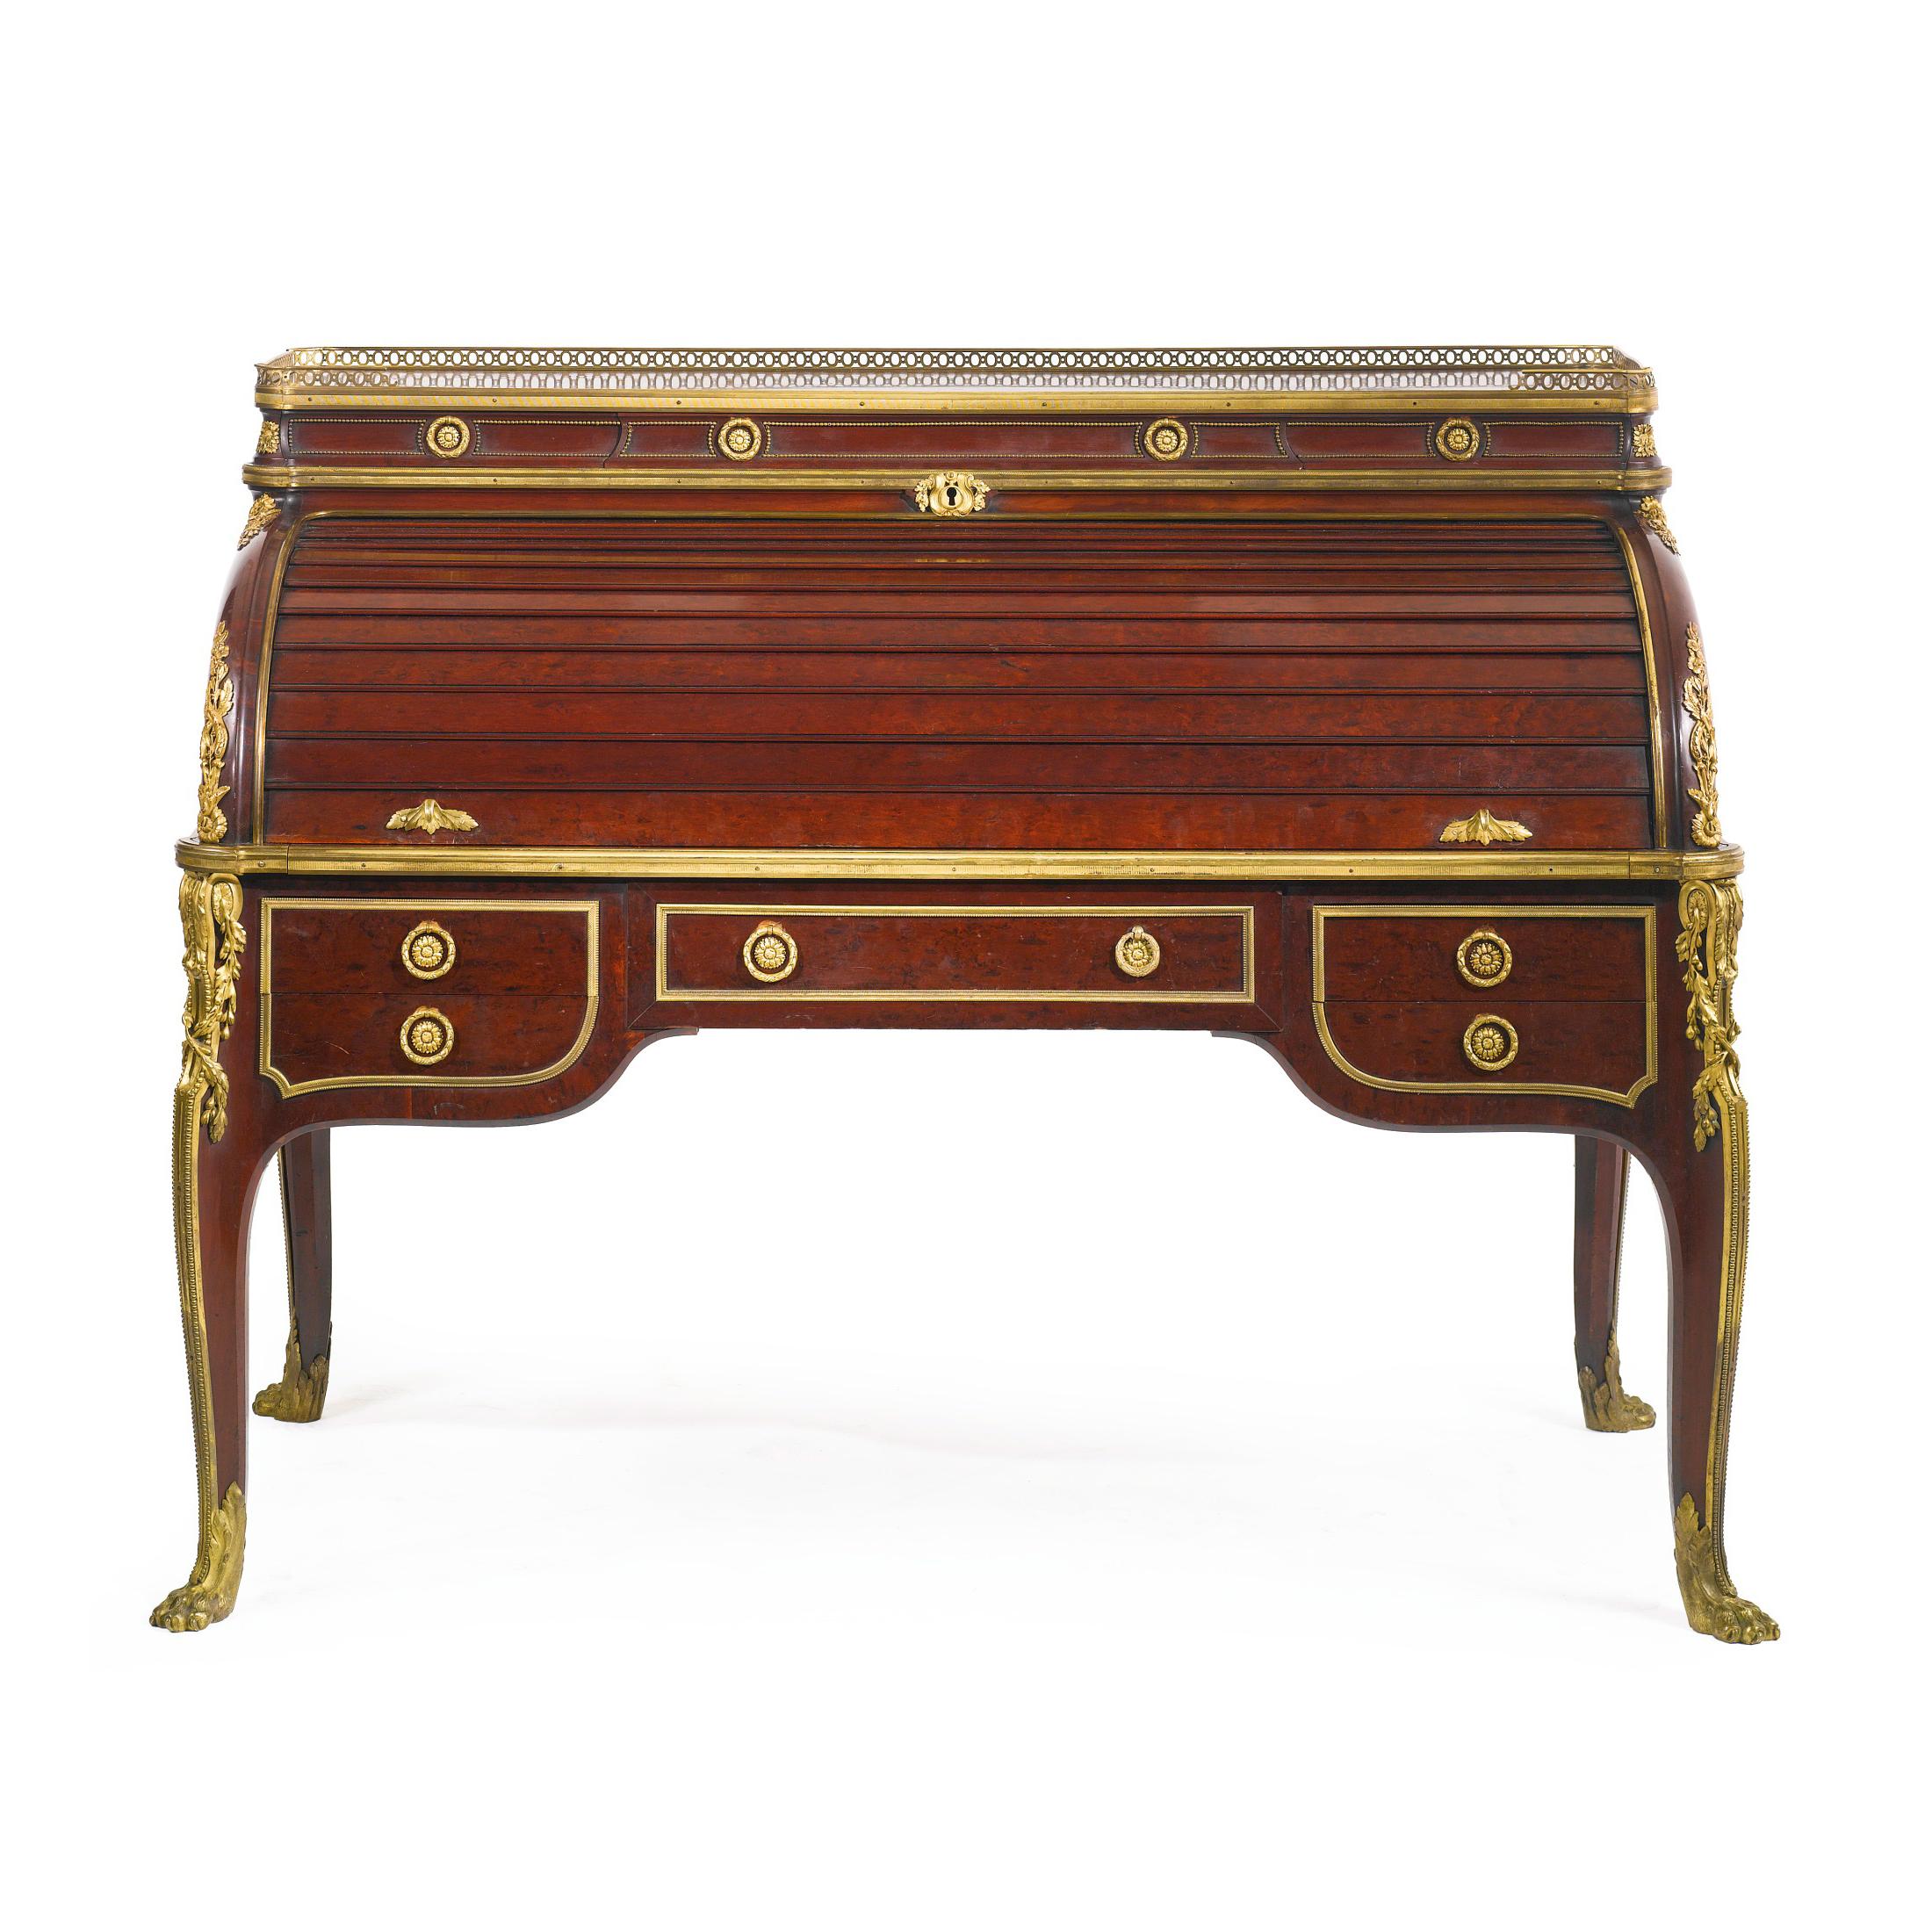 A fine quality Louis XVI style gilt bronze mounted plum pudding mahogany bureau à cylindre after the model by Jean-Henri Riesener.
The cylinder opening to six filing compartments and a blue leather lined writing slide, fitted with three small